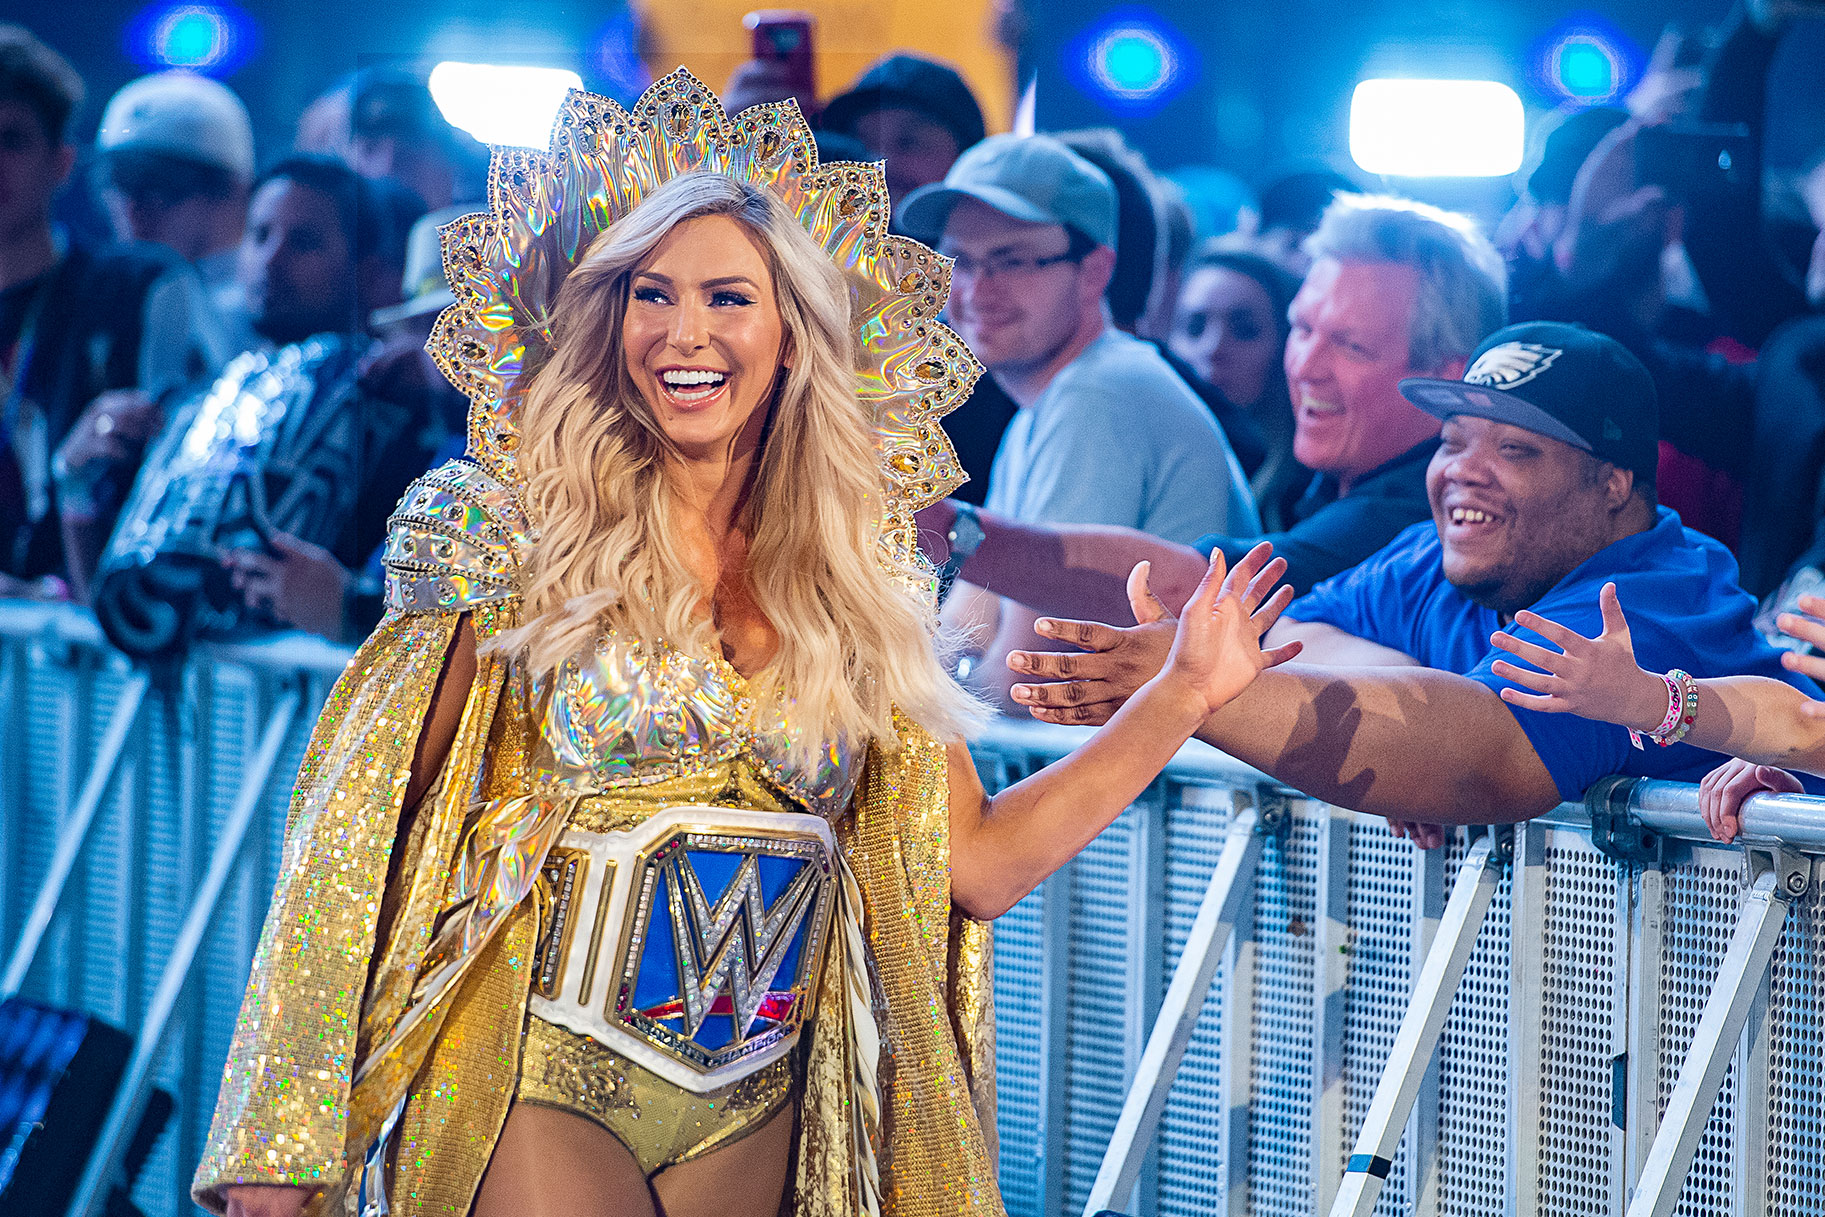 Charlotte Flair walking into the WWE ring wearing an extravagant gold jacket and headpiece. She is smiling